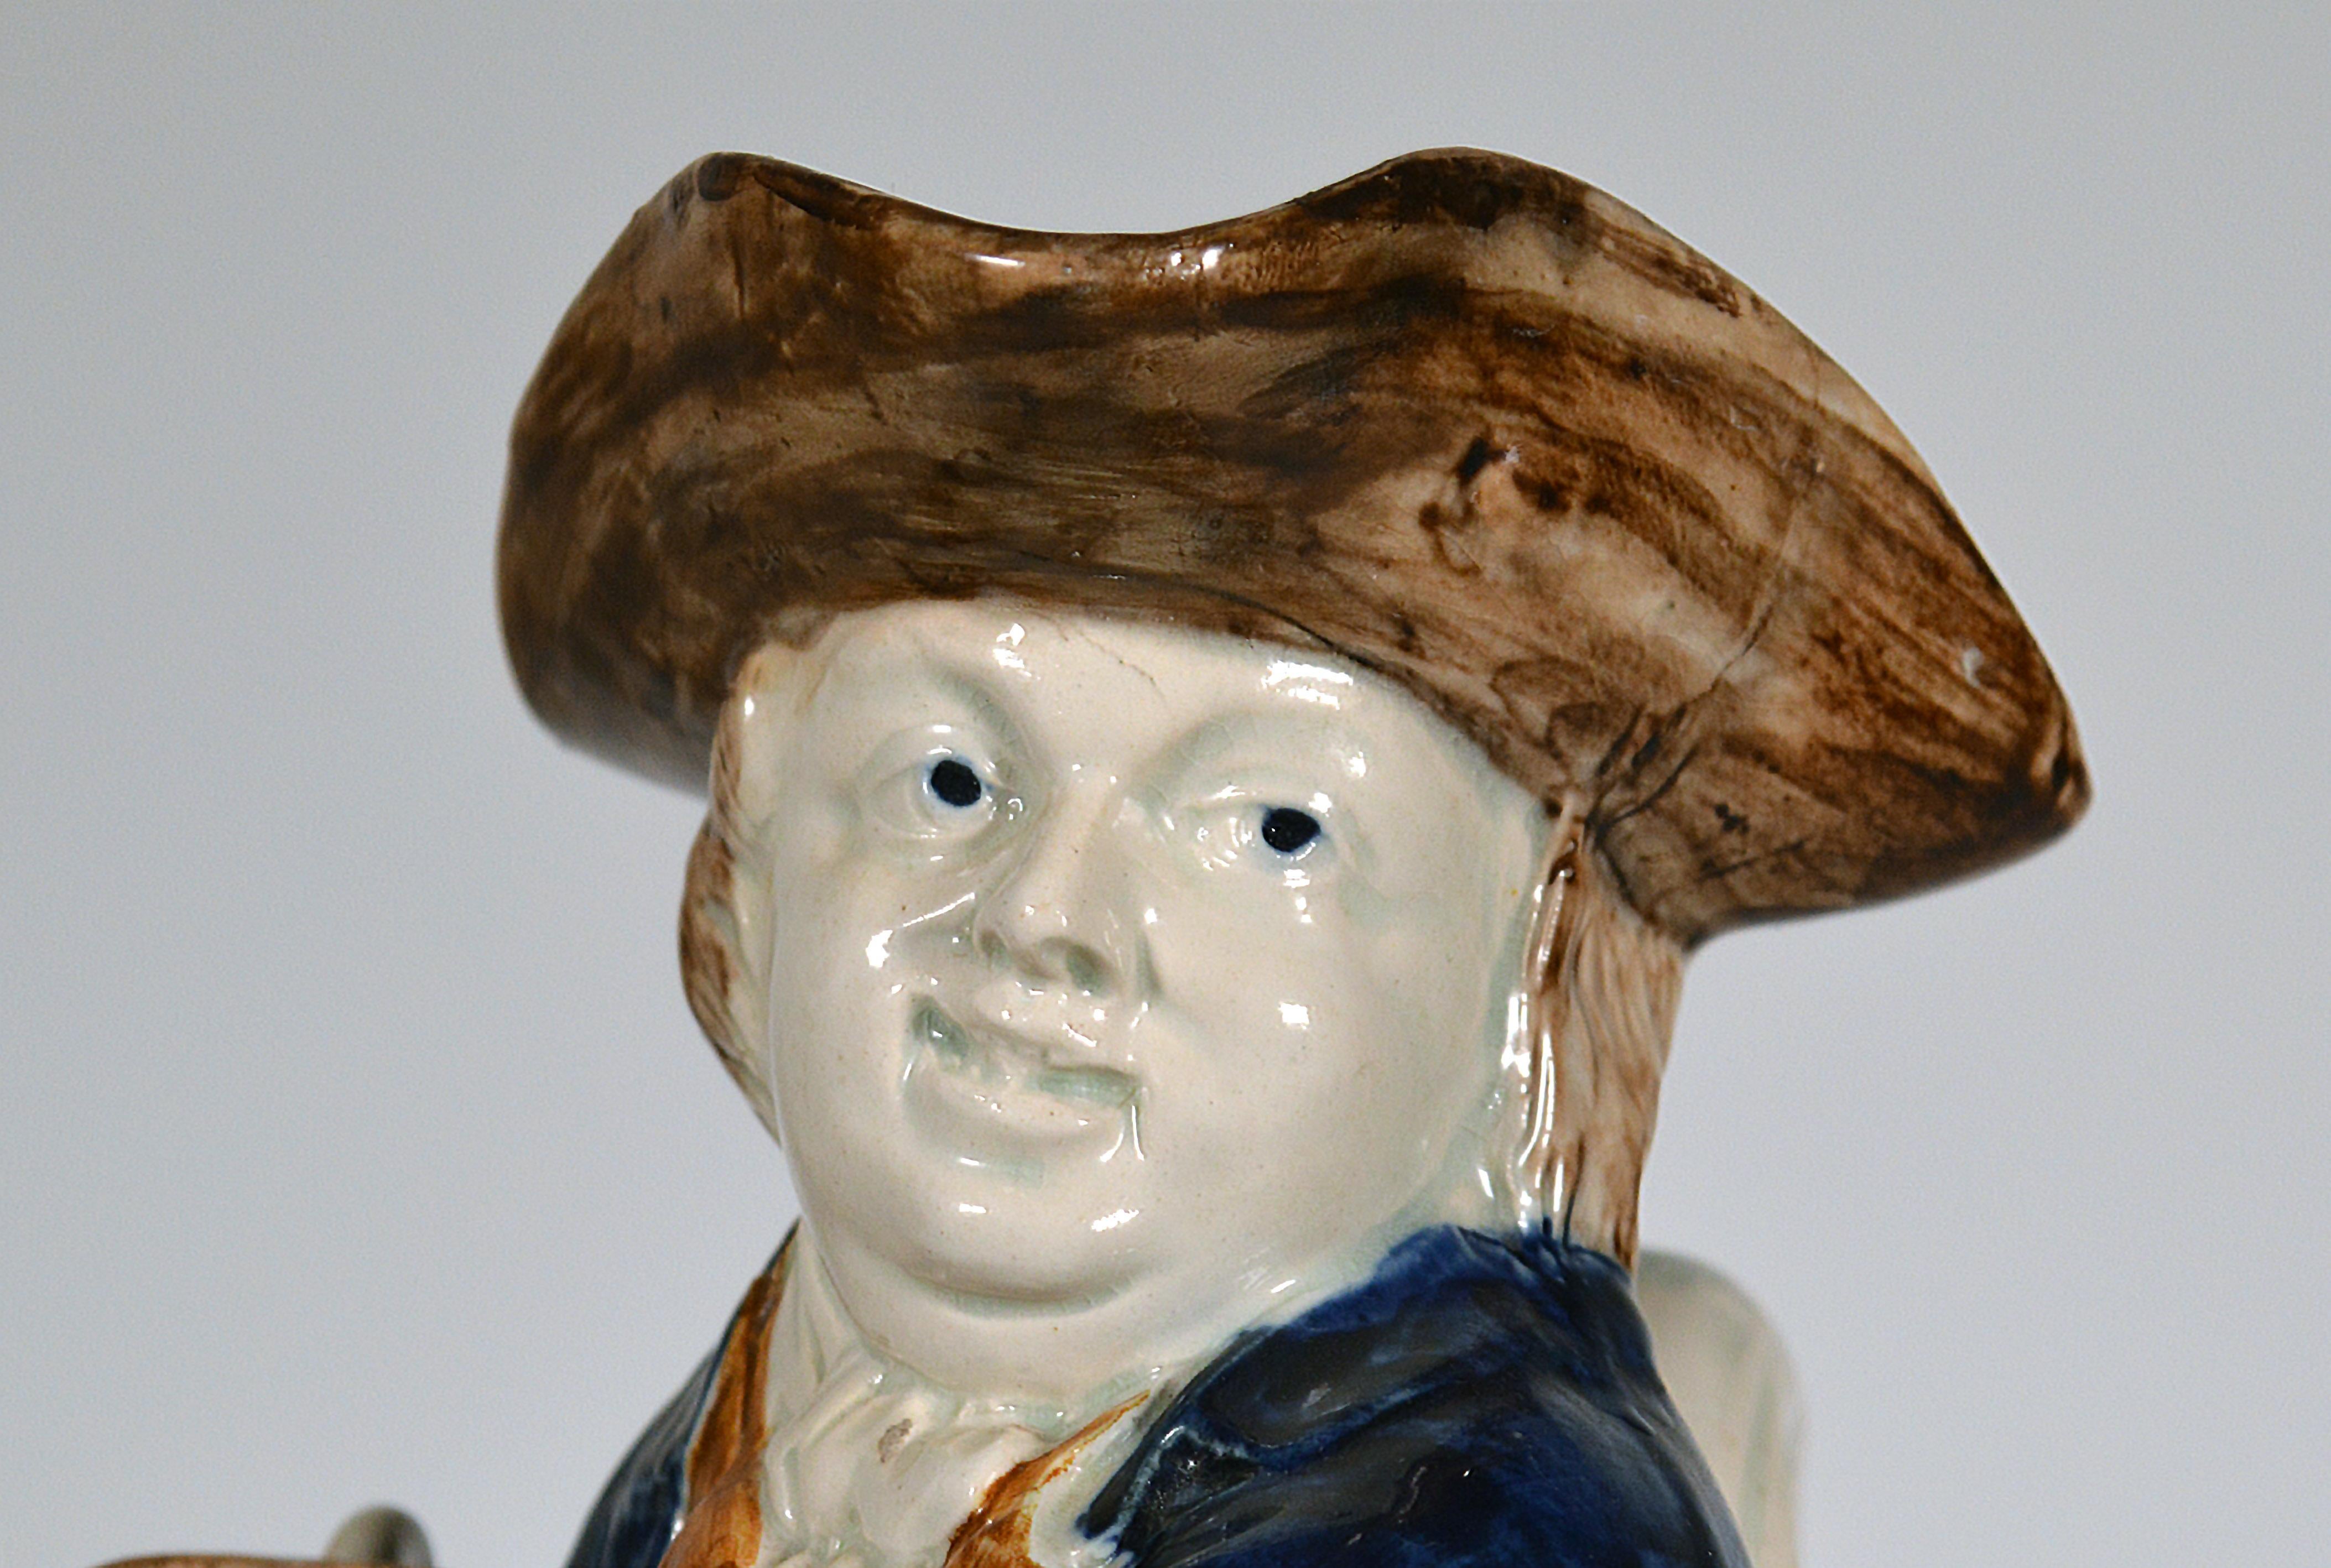 English pottery hearty good fellow pearlware toby jug
circa 1800
   

An unusual variation on the hearty good fellow standing toby jug, The base in white with the Toby figure standing, supporting a large white jug under his right arm, and